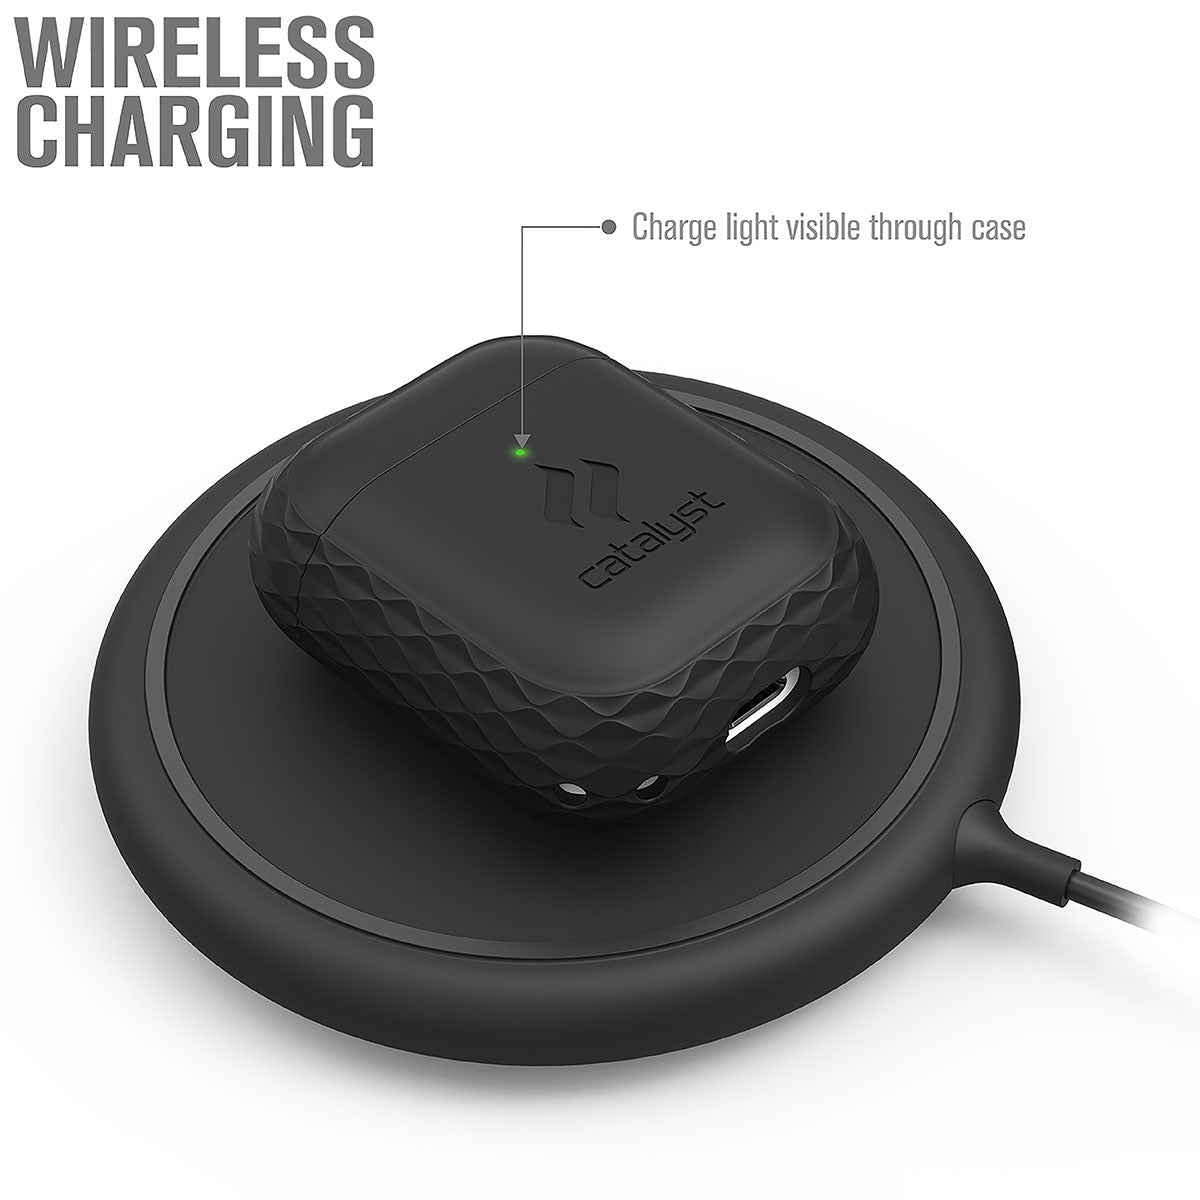 Catalyst airpods gen2/1 case plus lanyard showing the case on the wireless charger text reads wireless charging charge light visible through case